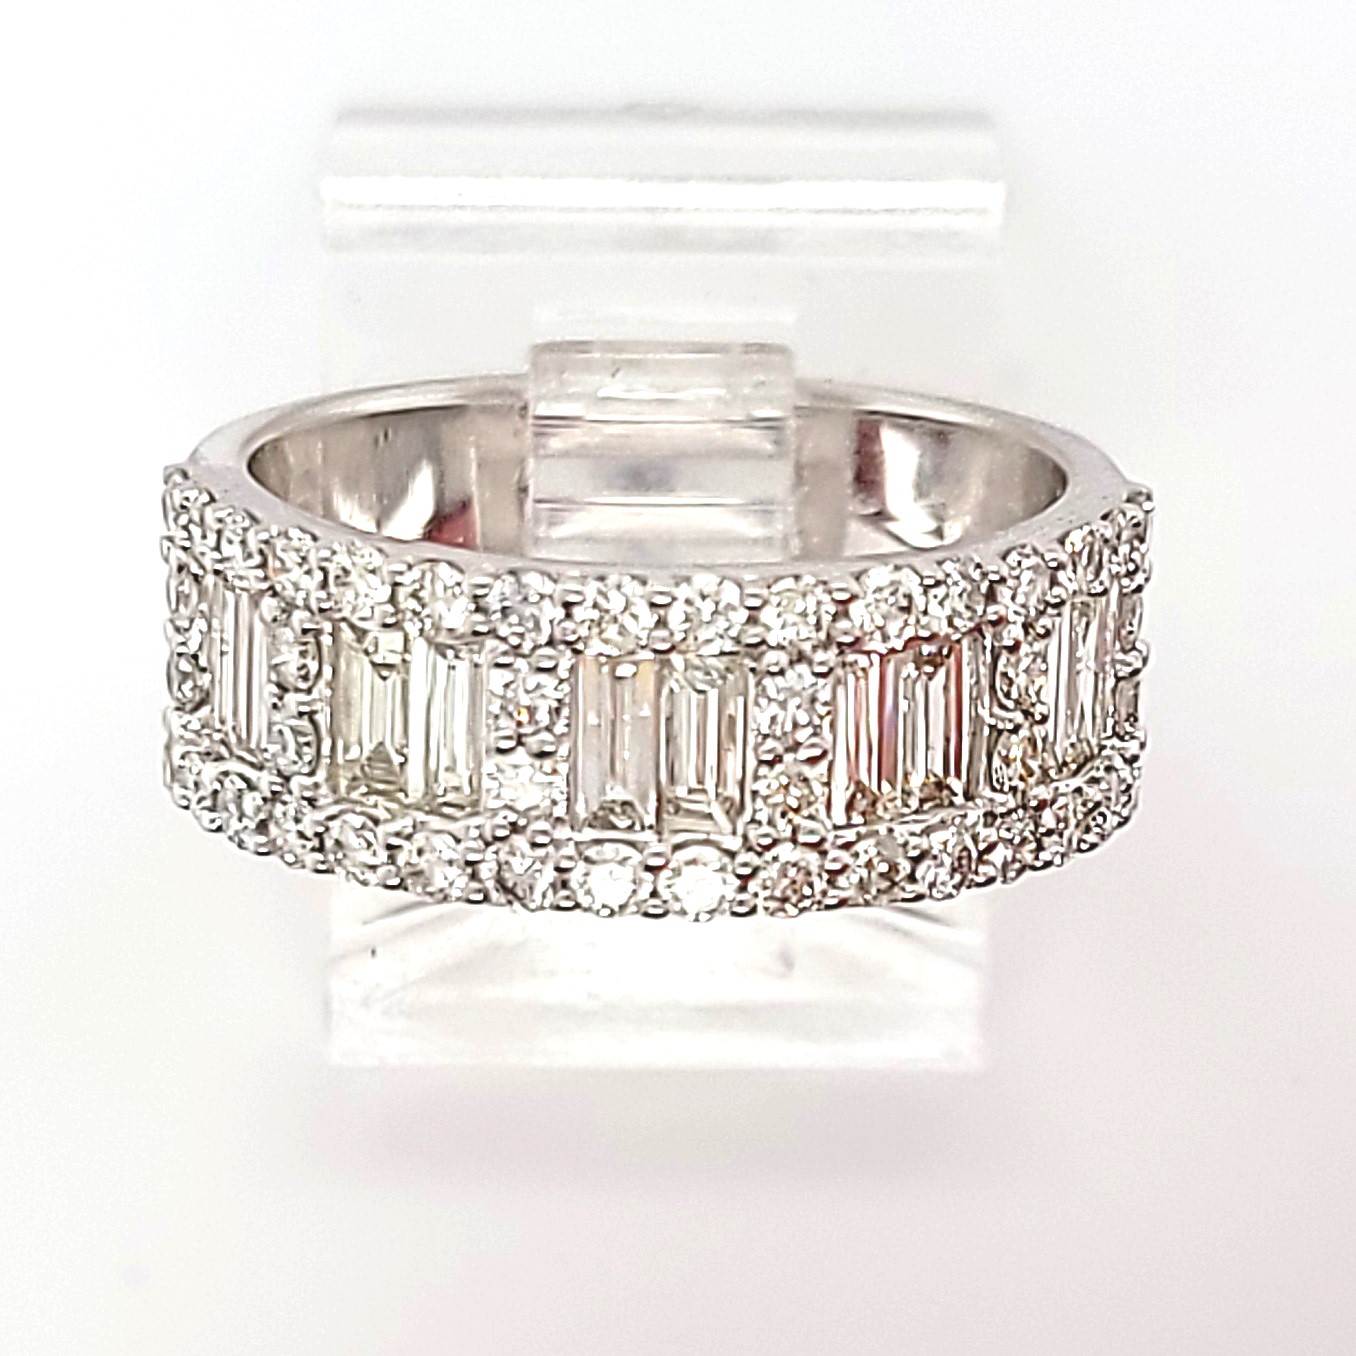 Wide Two-Row Baguette Diamond Band Ring